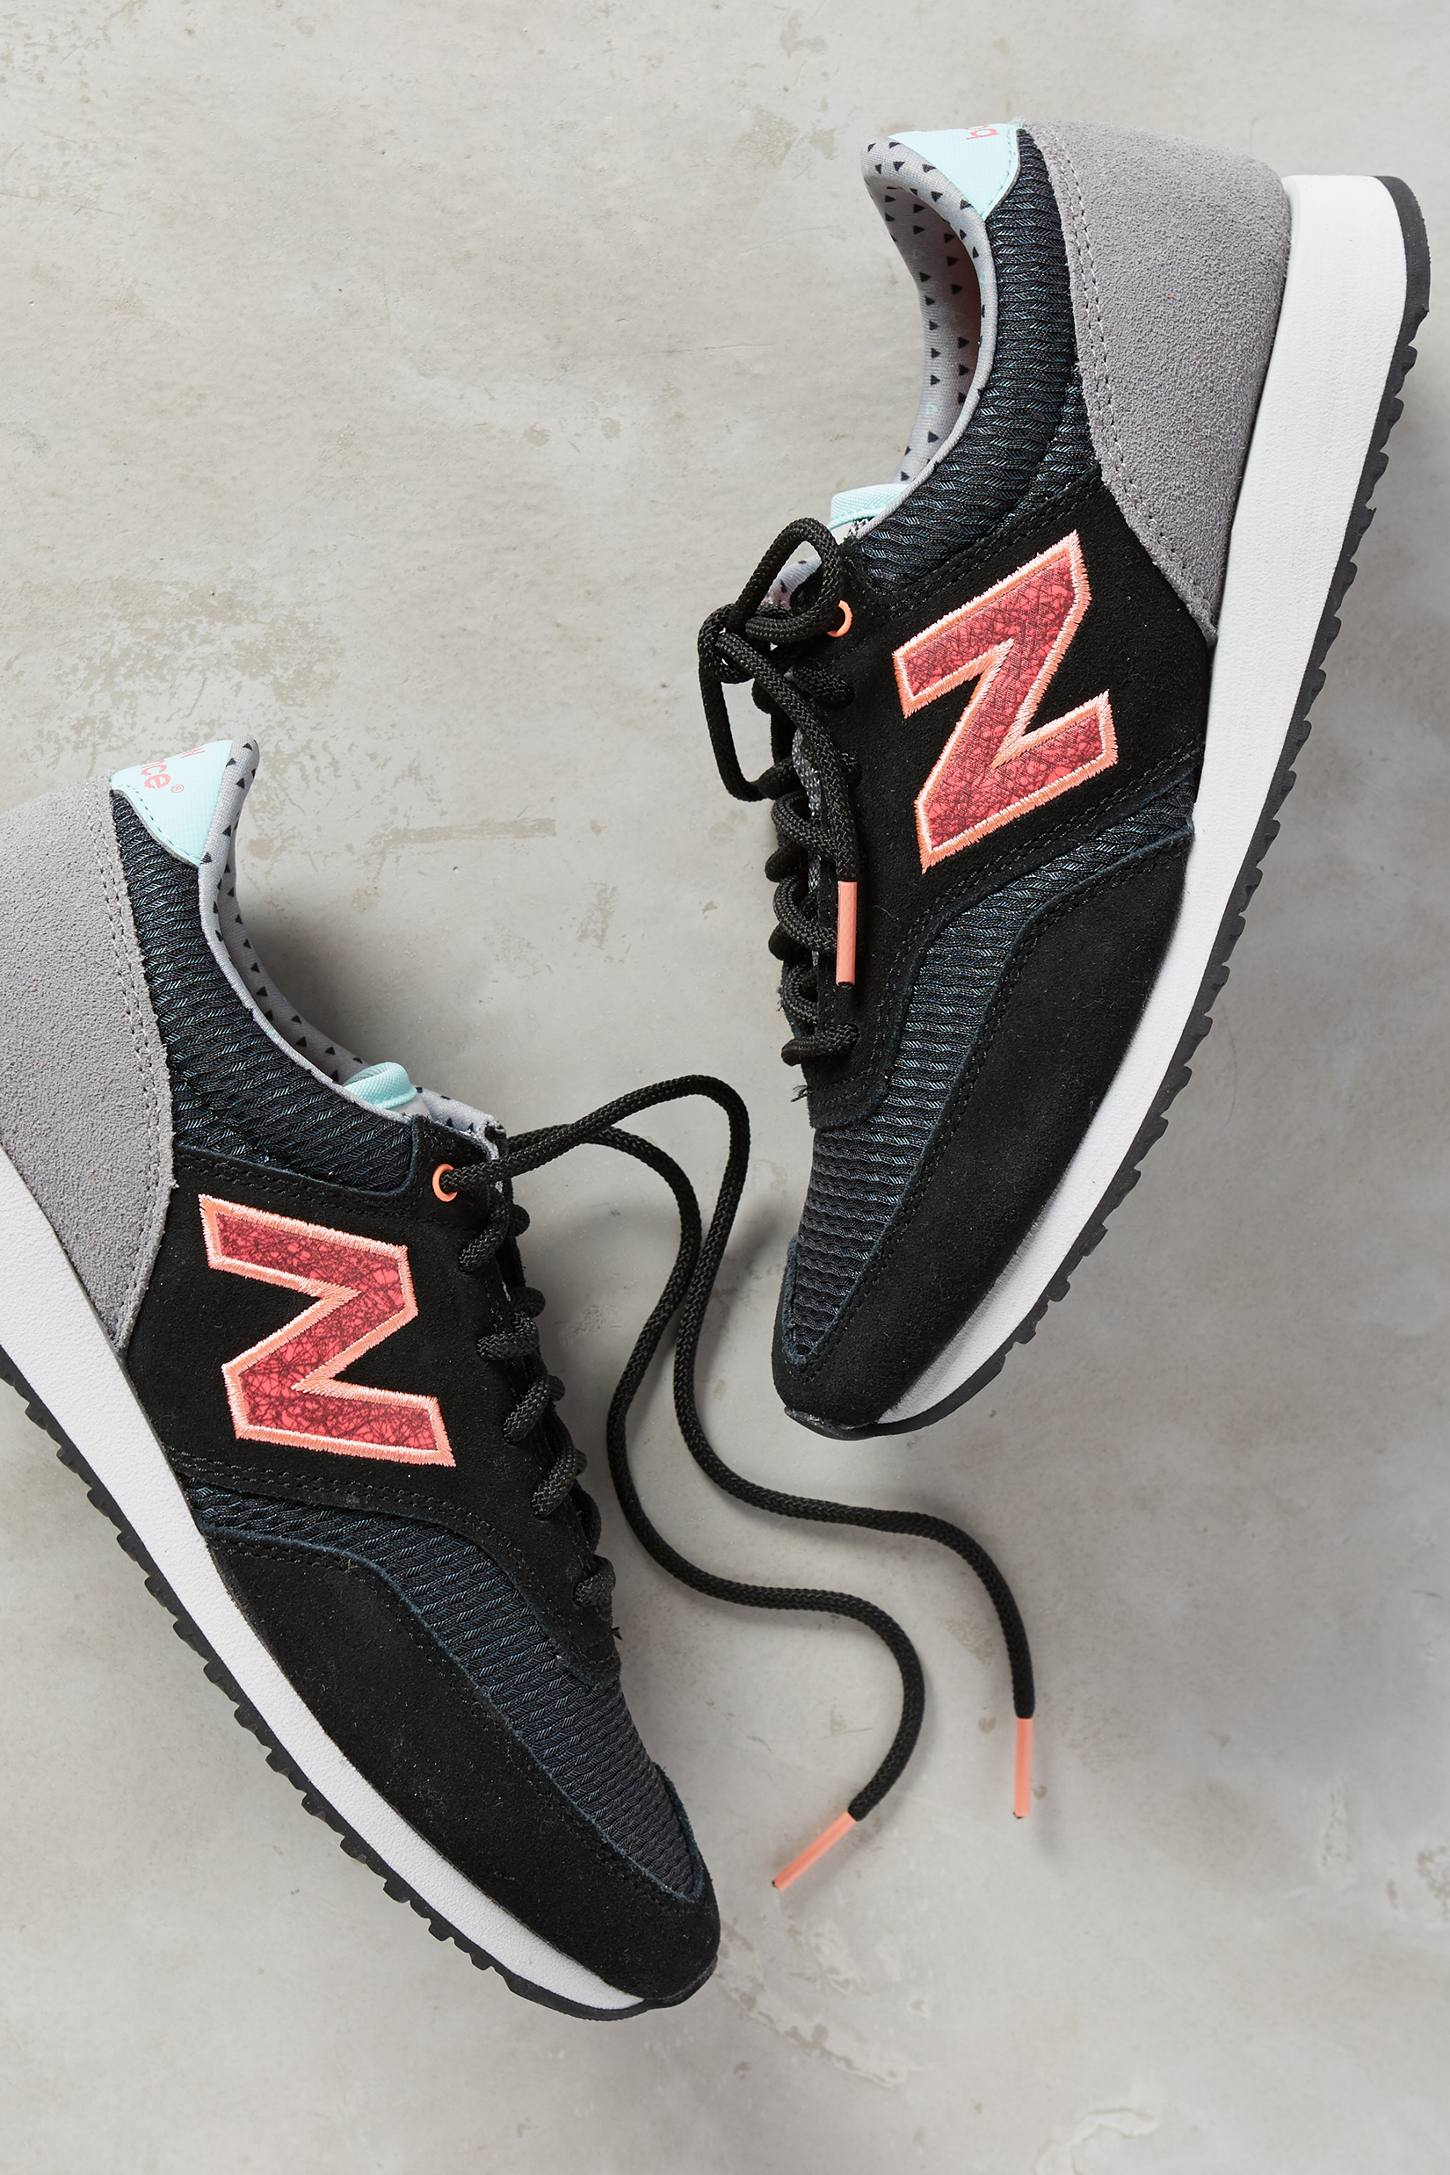 new balance pink and navy who carries new balance shoes